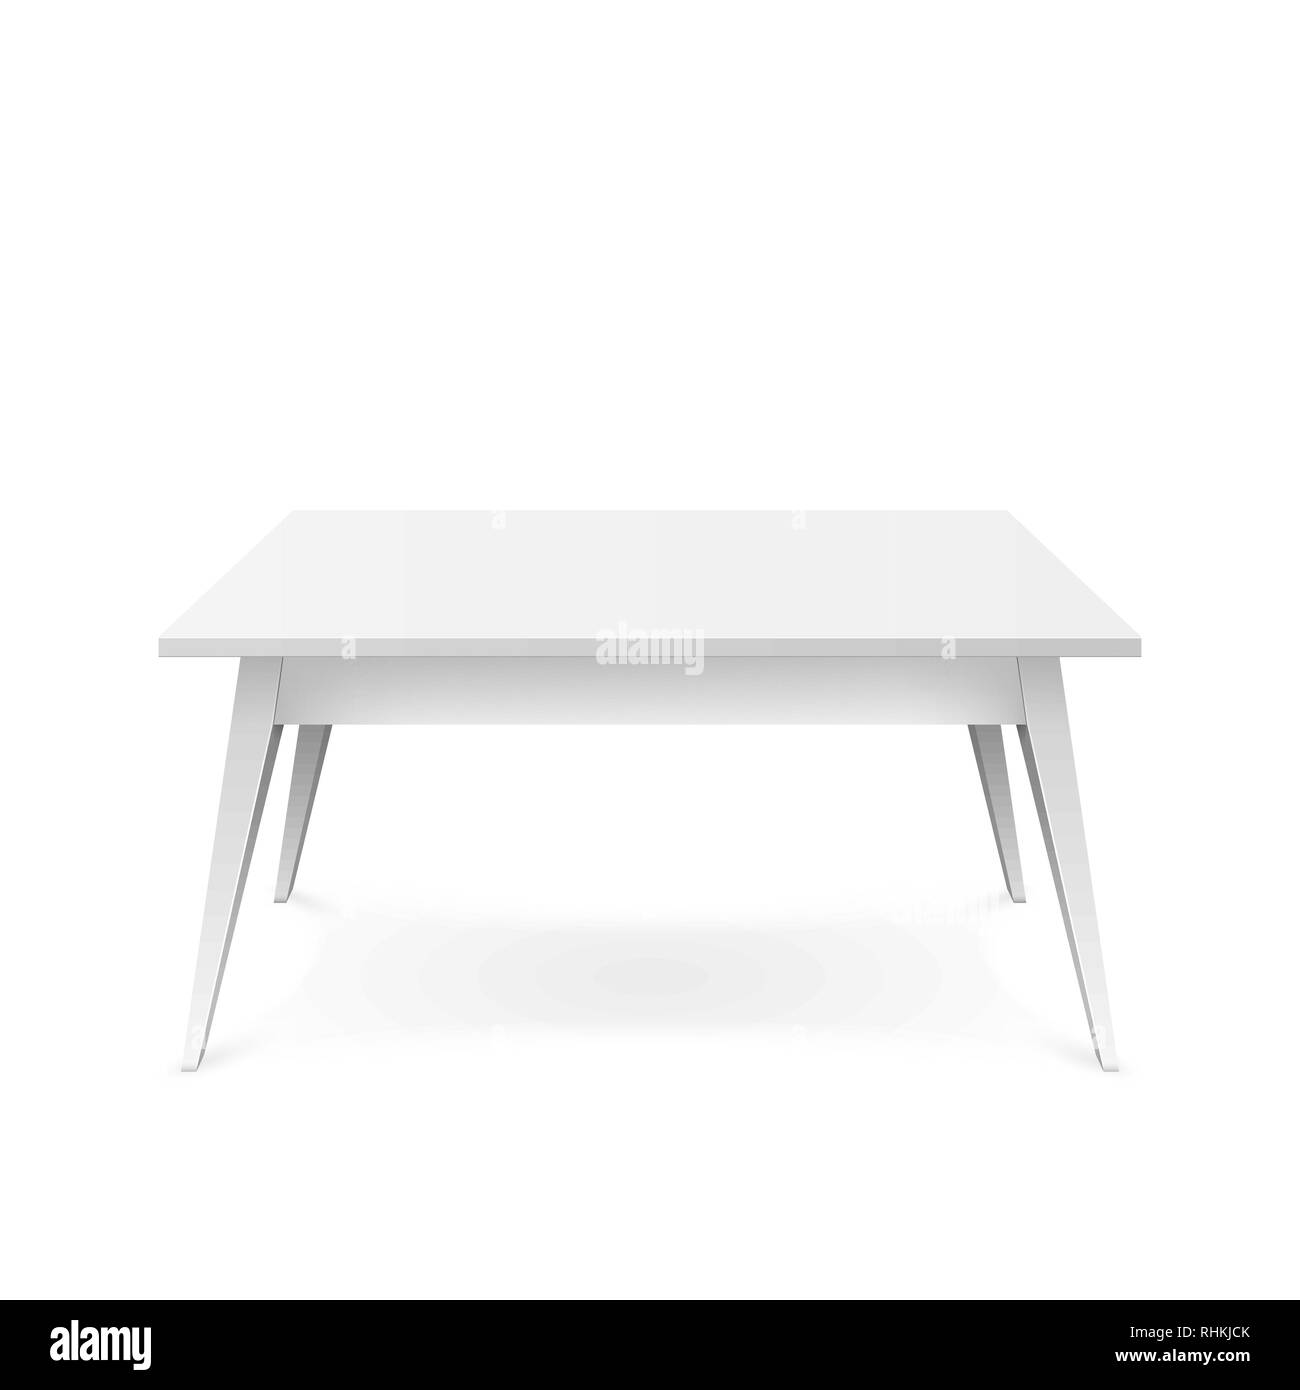 Realistic white table. White office table with shadow. Vector illustration isolated on white background Stock Vector